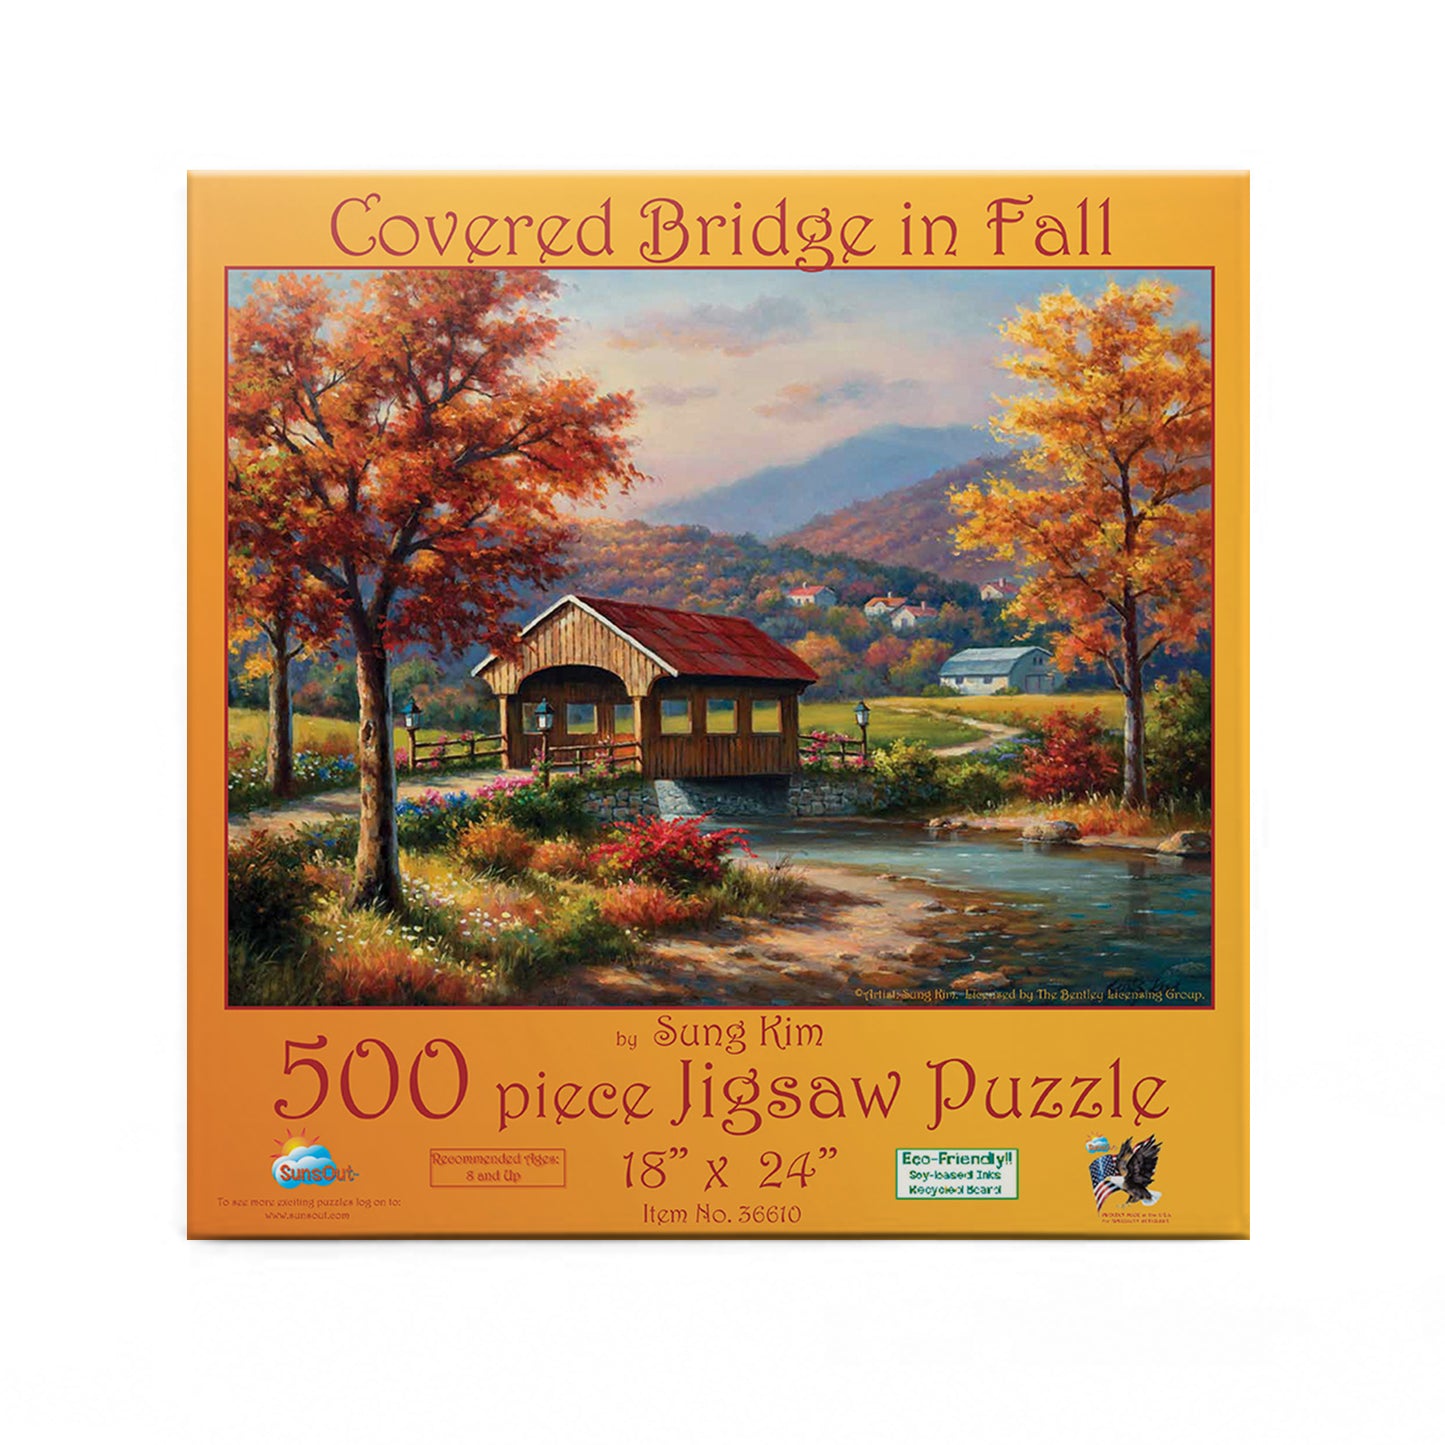 Covered Bridge in Fall (16) - 500 Piece Jigsaw Puzzle